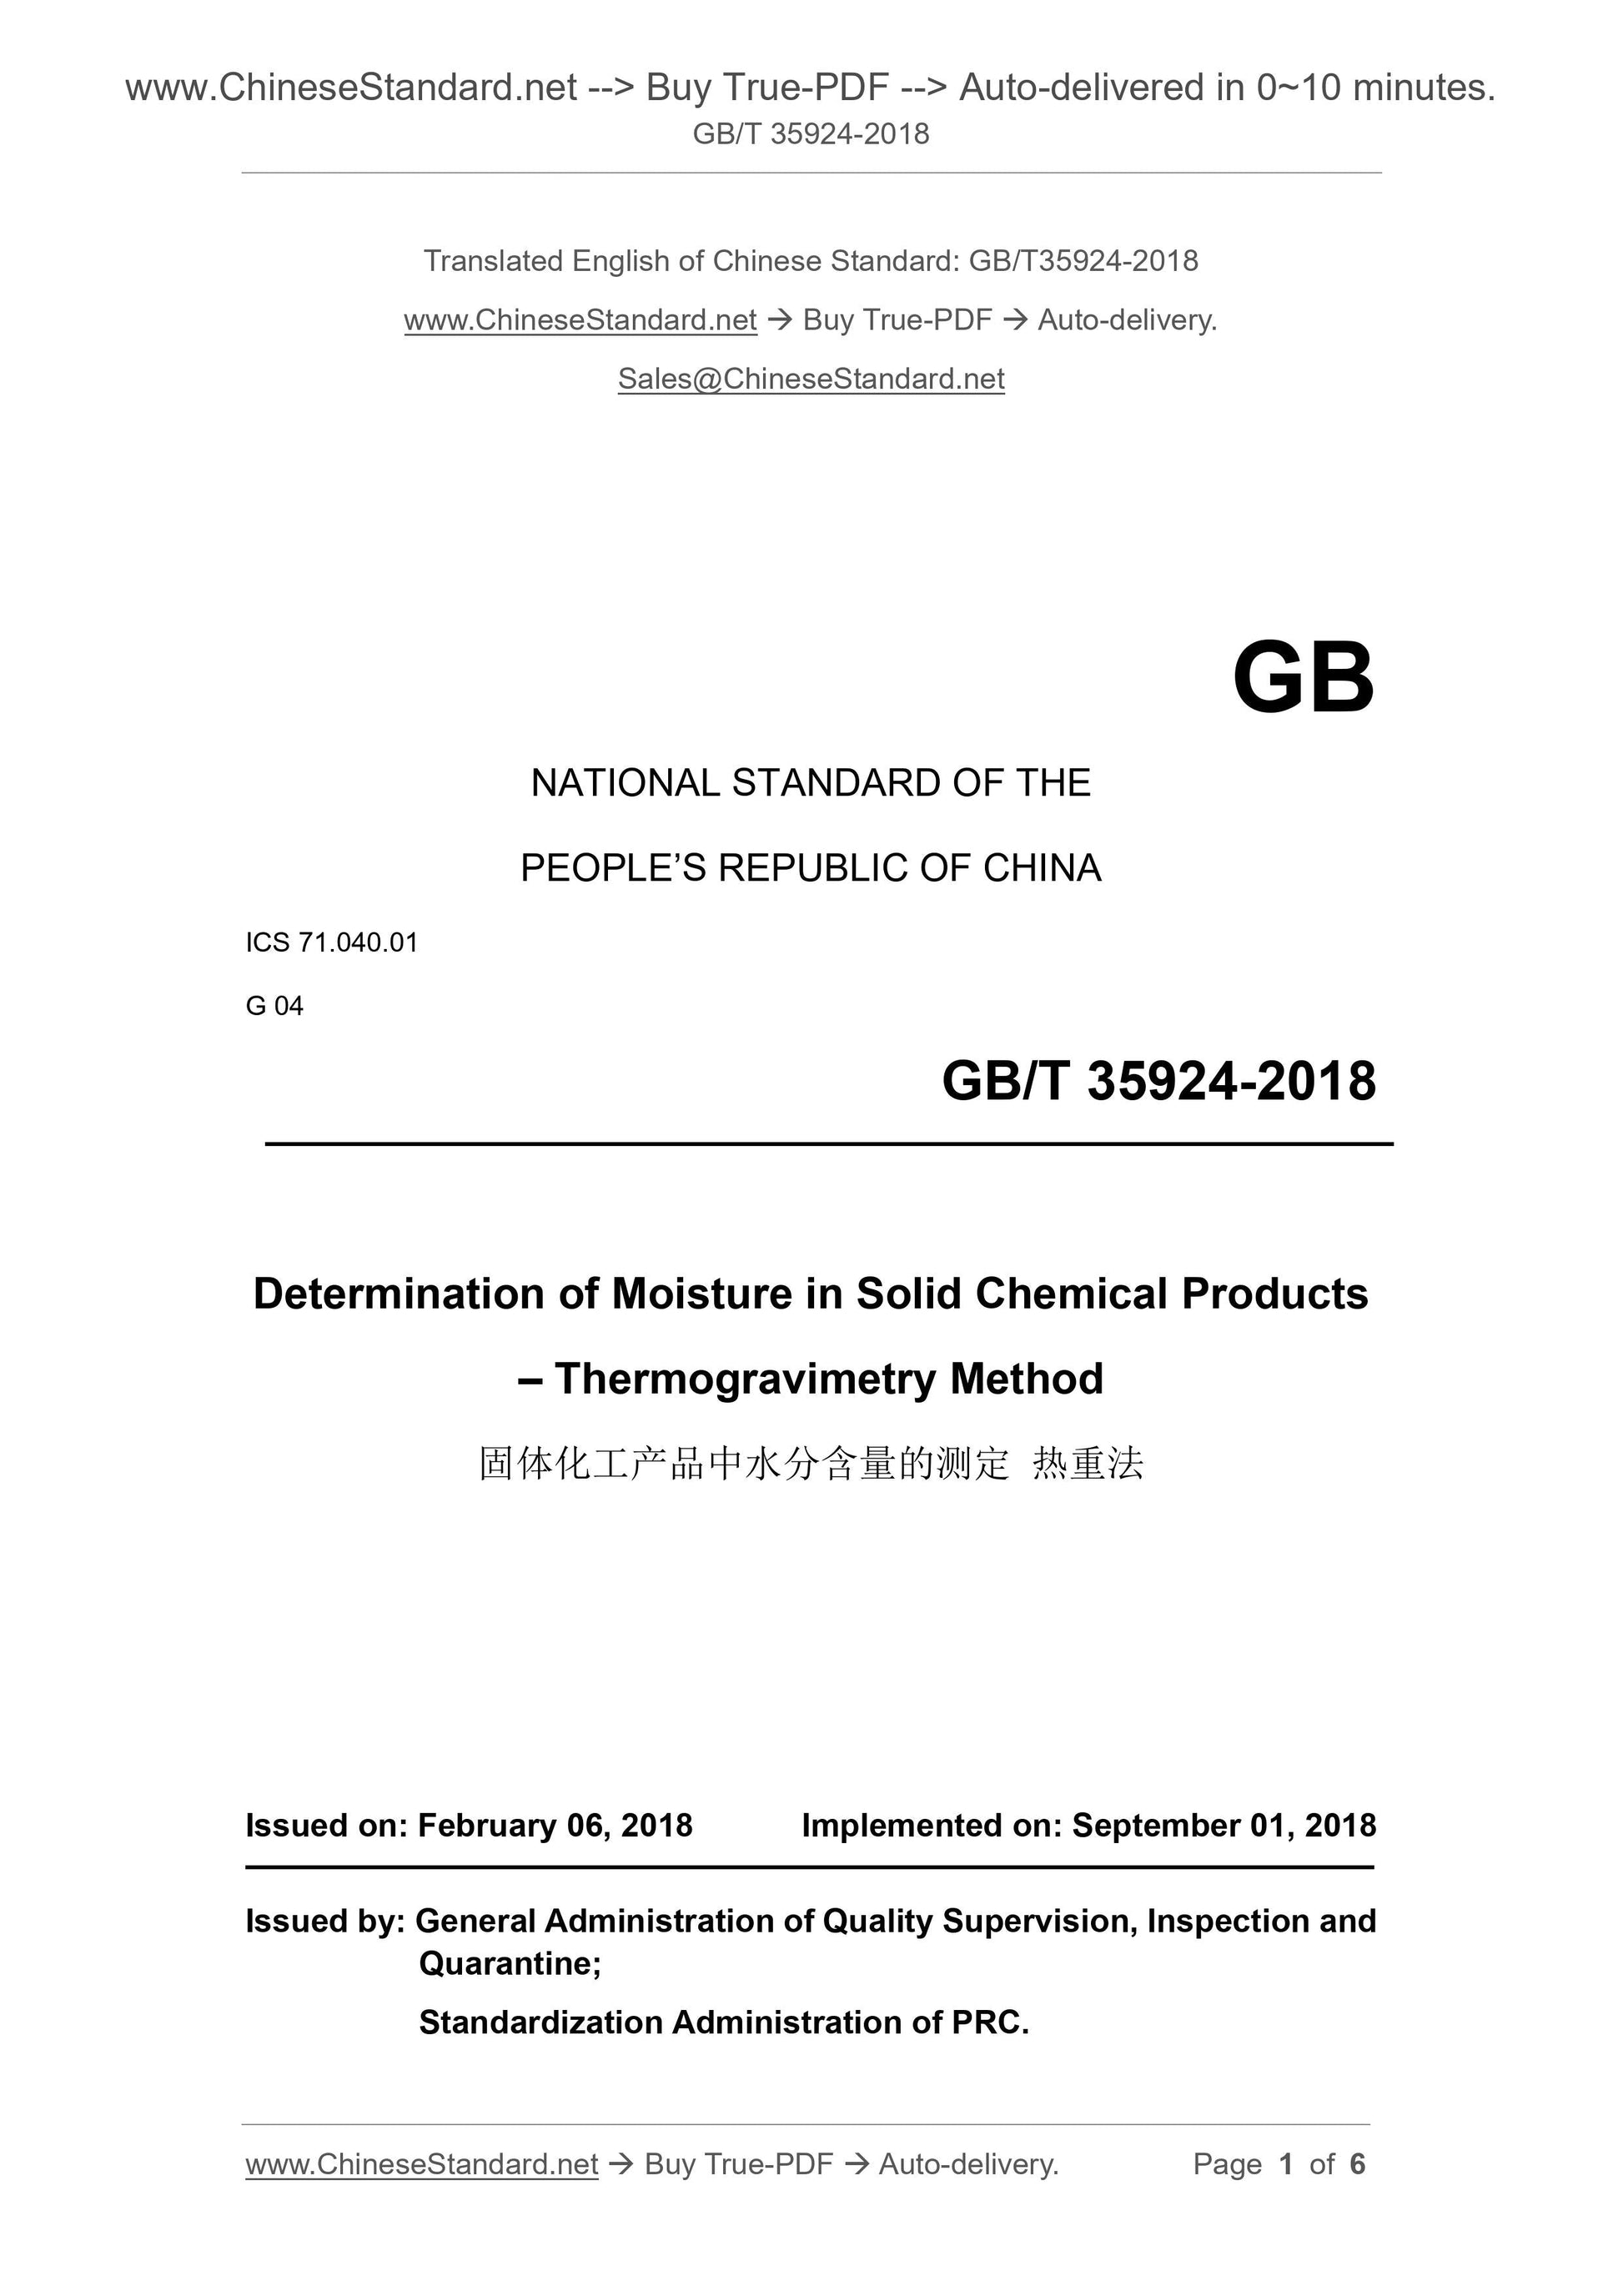 GB/T 35924-2018 Page 1